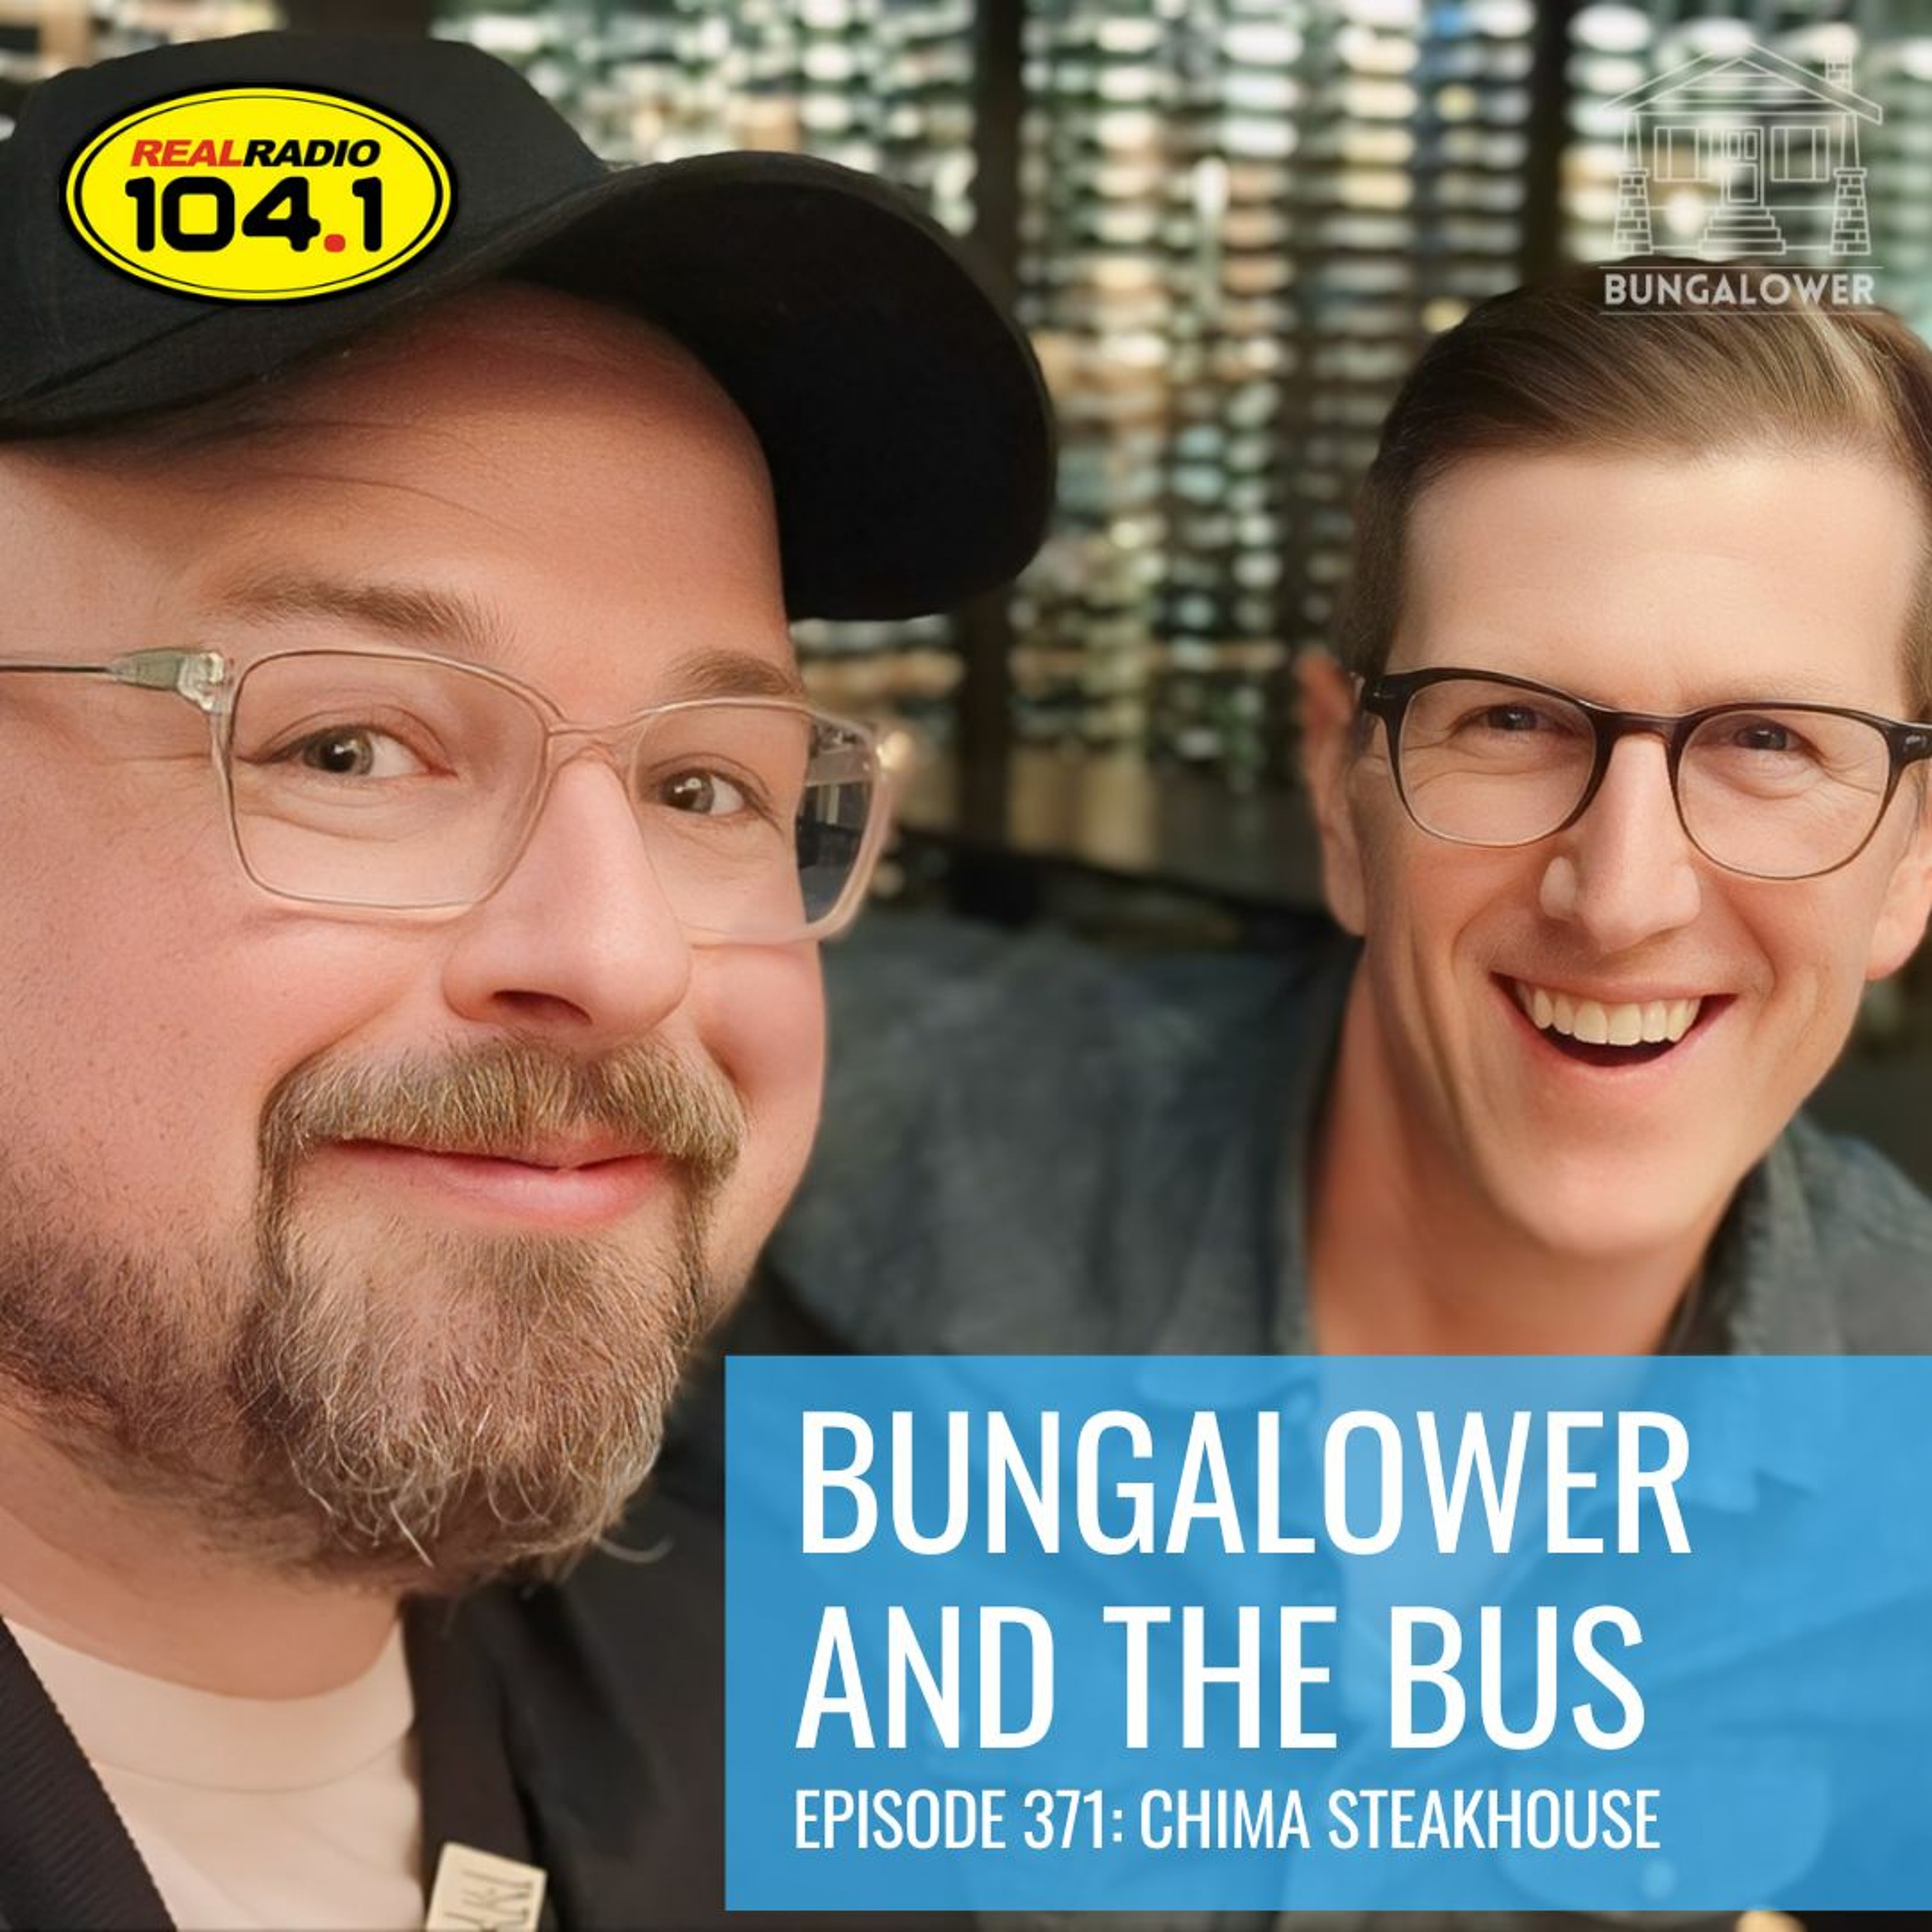 Bungalower and The Bus: Episode 371 (Chima Steakhouse)